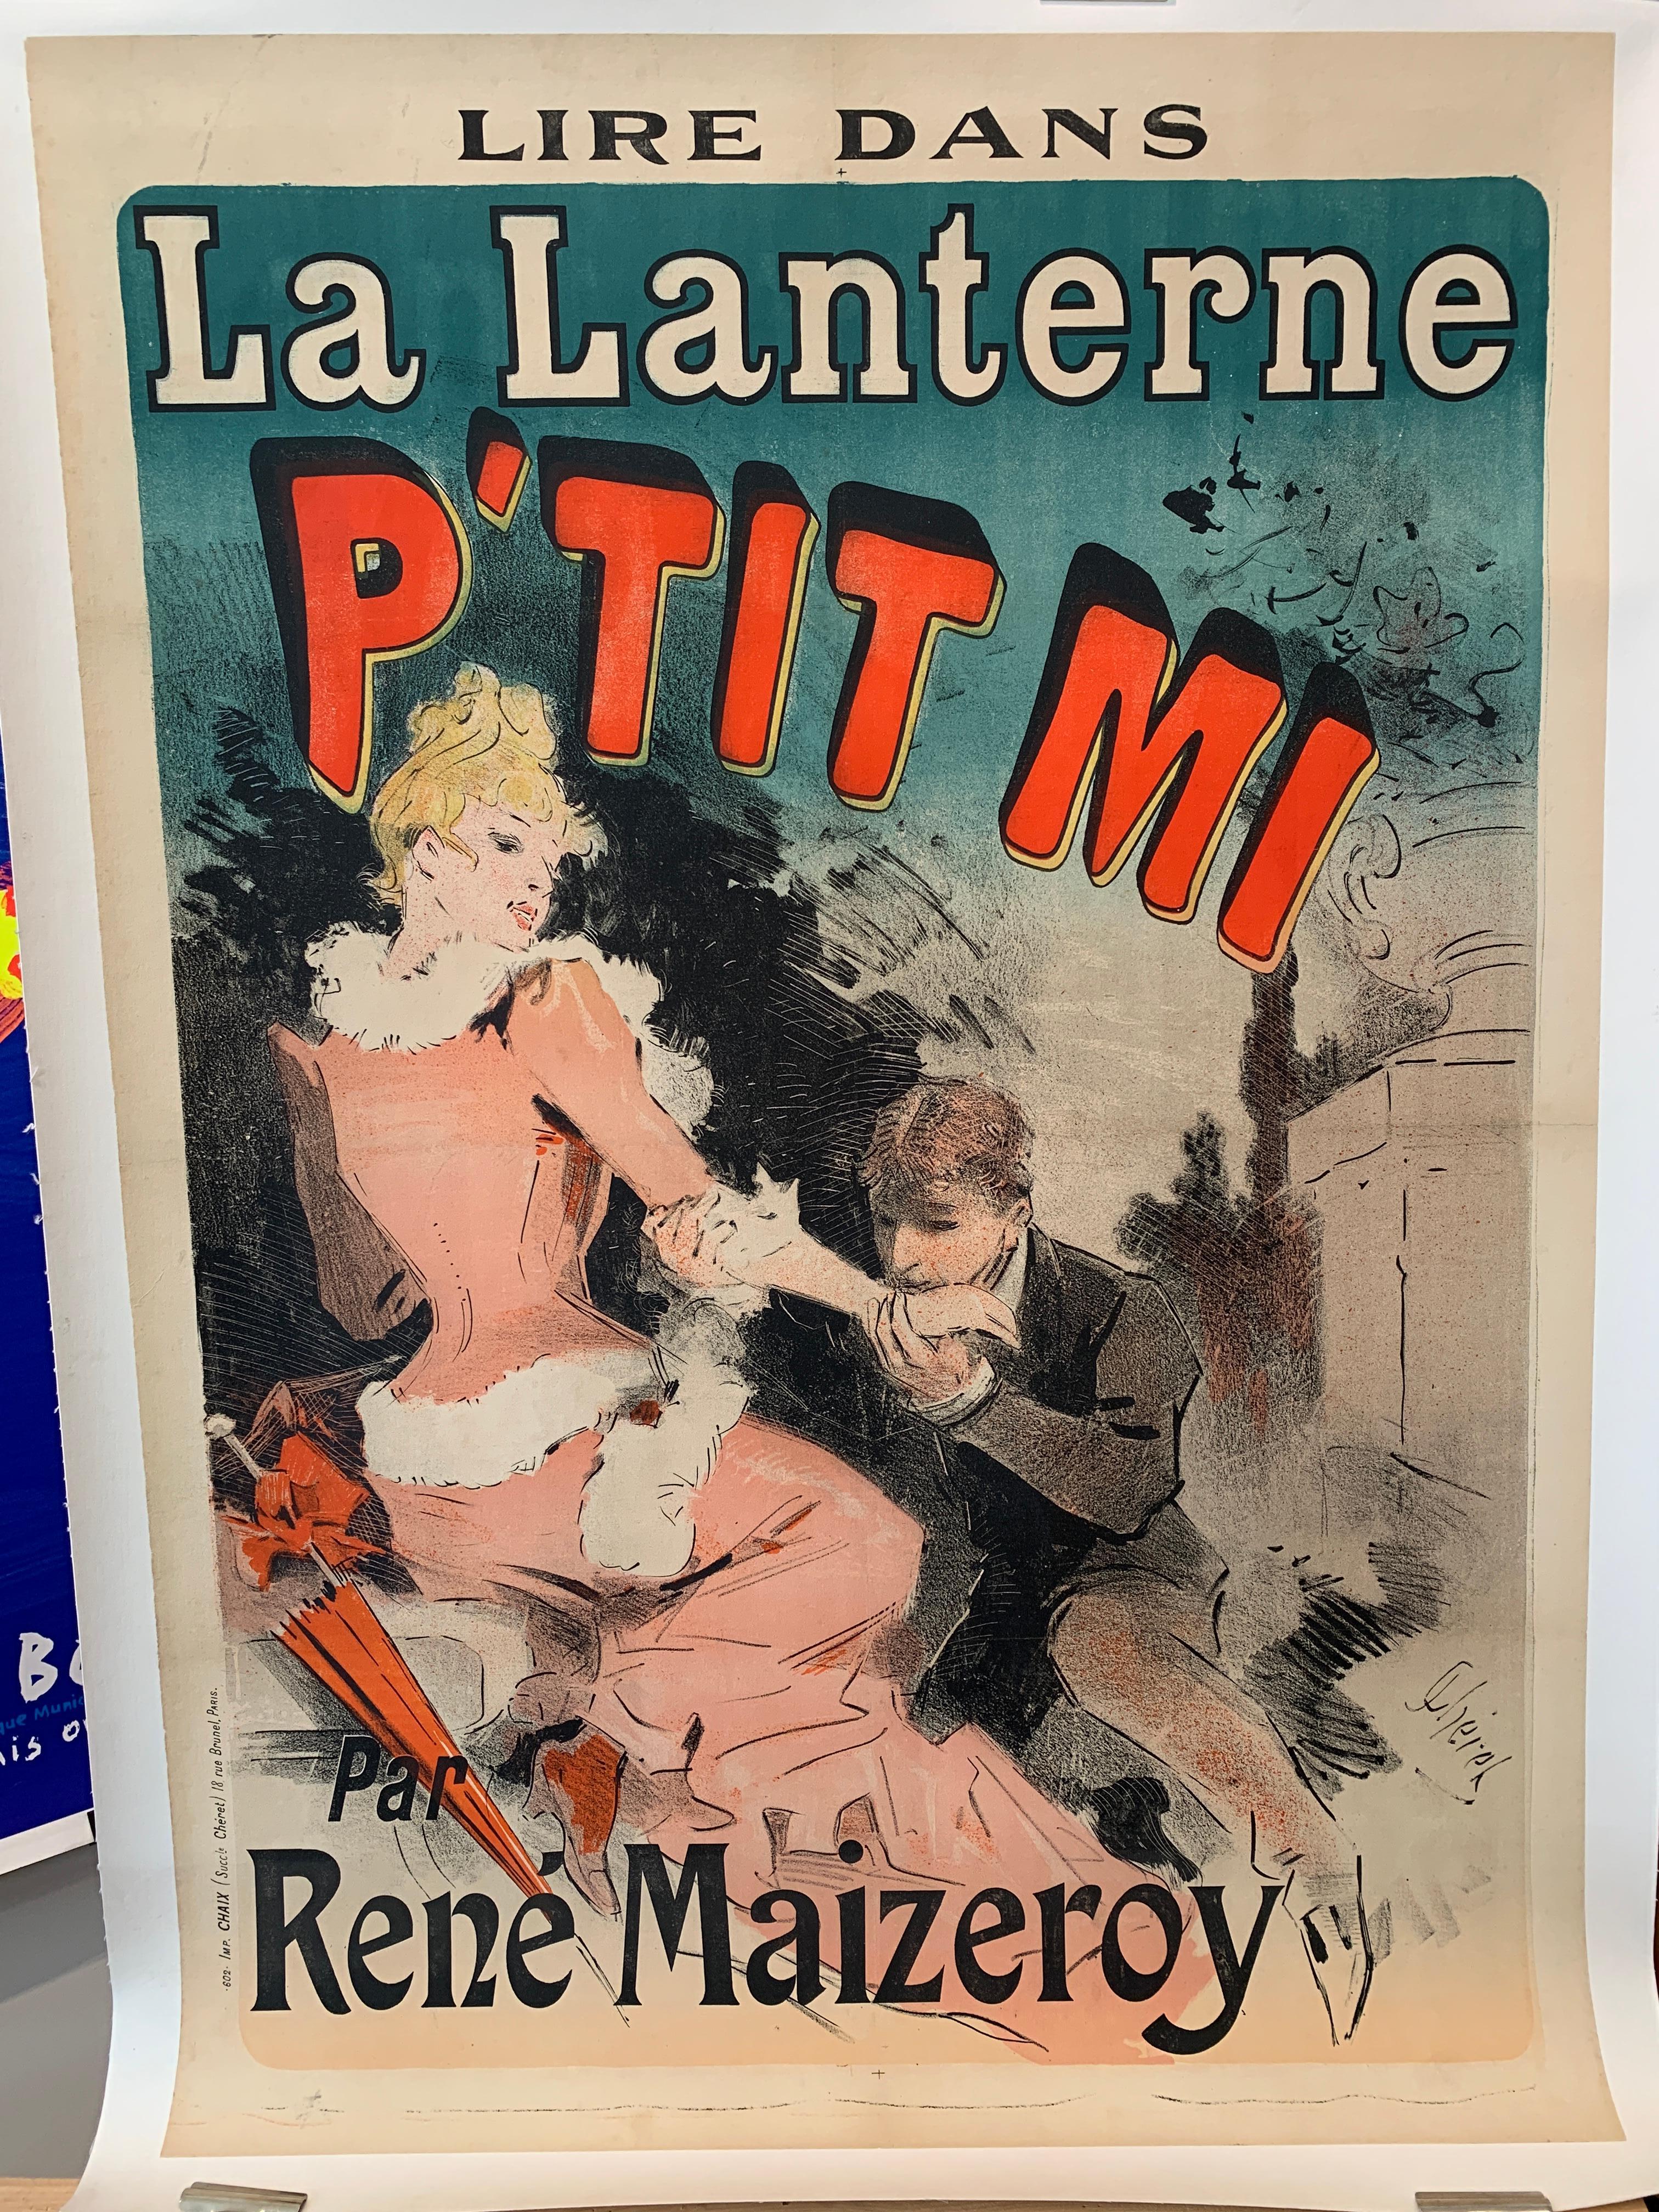 'La Lanterne p'tit mi', Original Vintage 18th Century Theatre Poster by J Cheret

Original Vintage poster from 1890, this poster has been backed onto linen for preservation. The colours are vibrant. 

ARTIST	
J